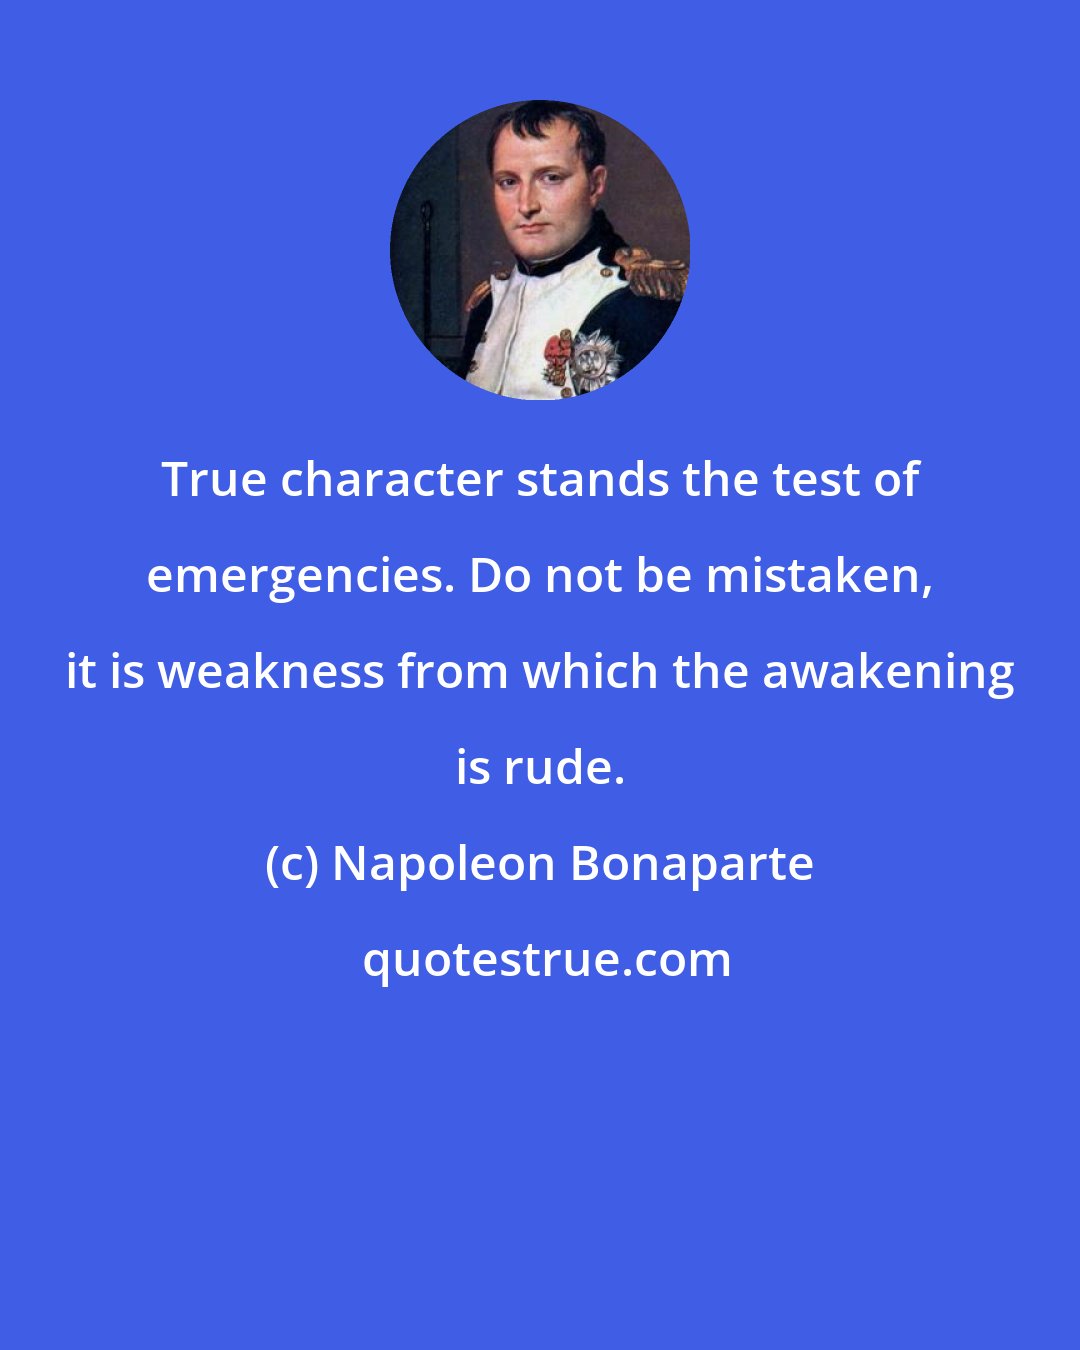 Napoleon Bonaparte: True character stands the test of emergencies. Do not be mistaken, it is weakness from which the awakening is rude.